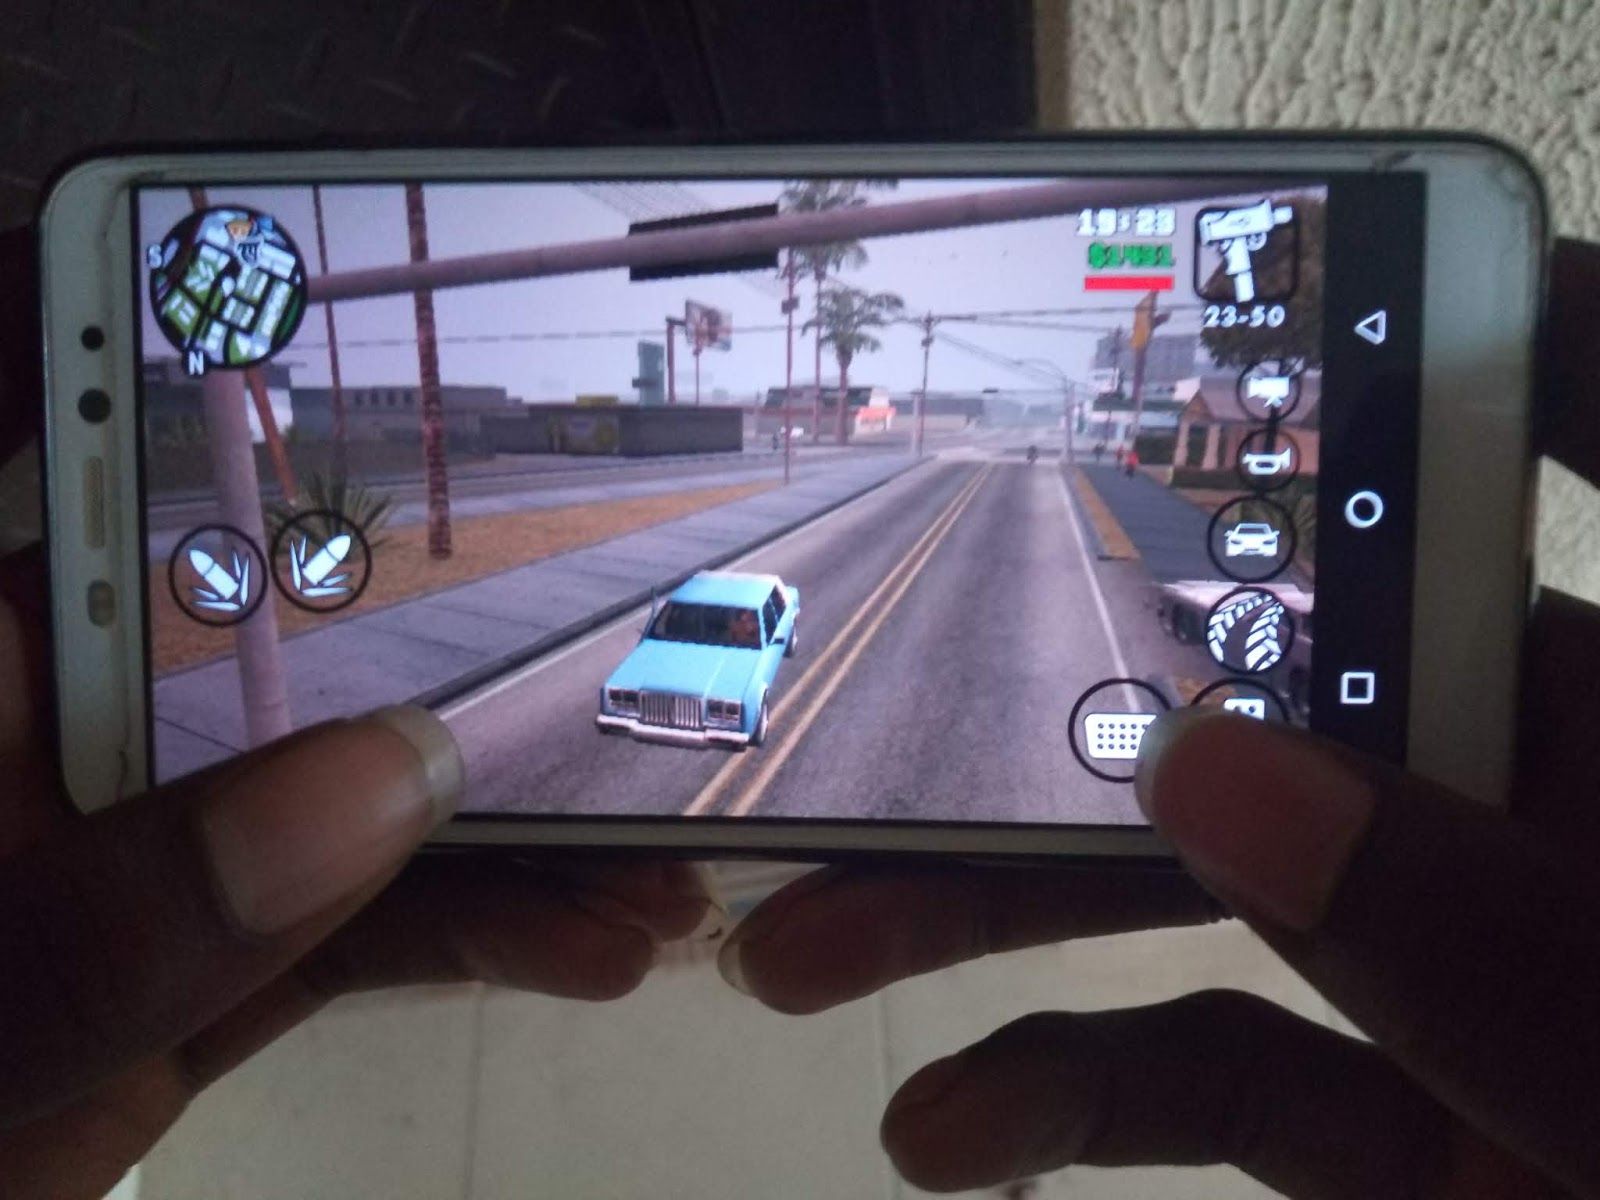 gta san andreas apk download for android 6.0.1